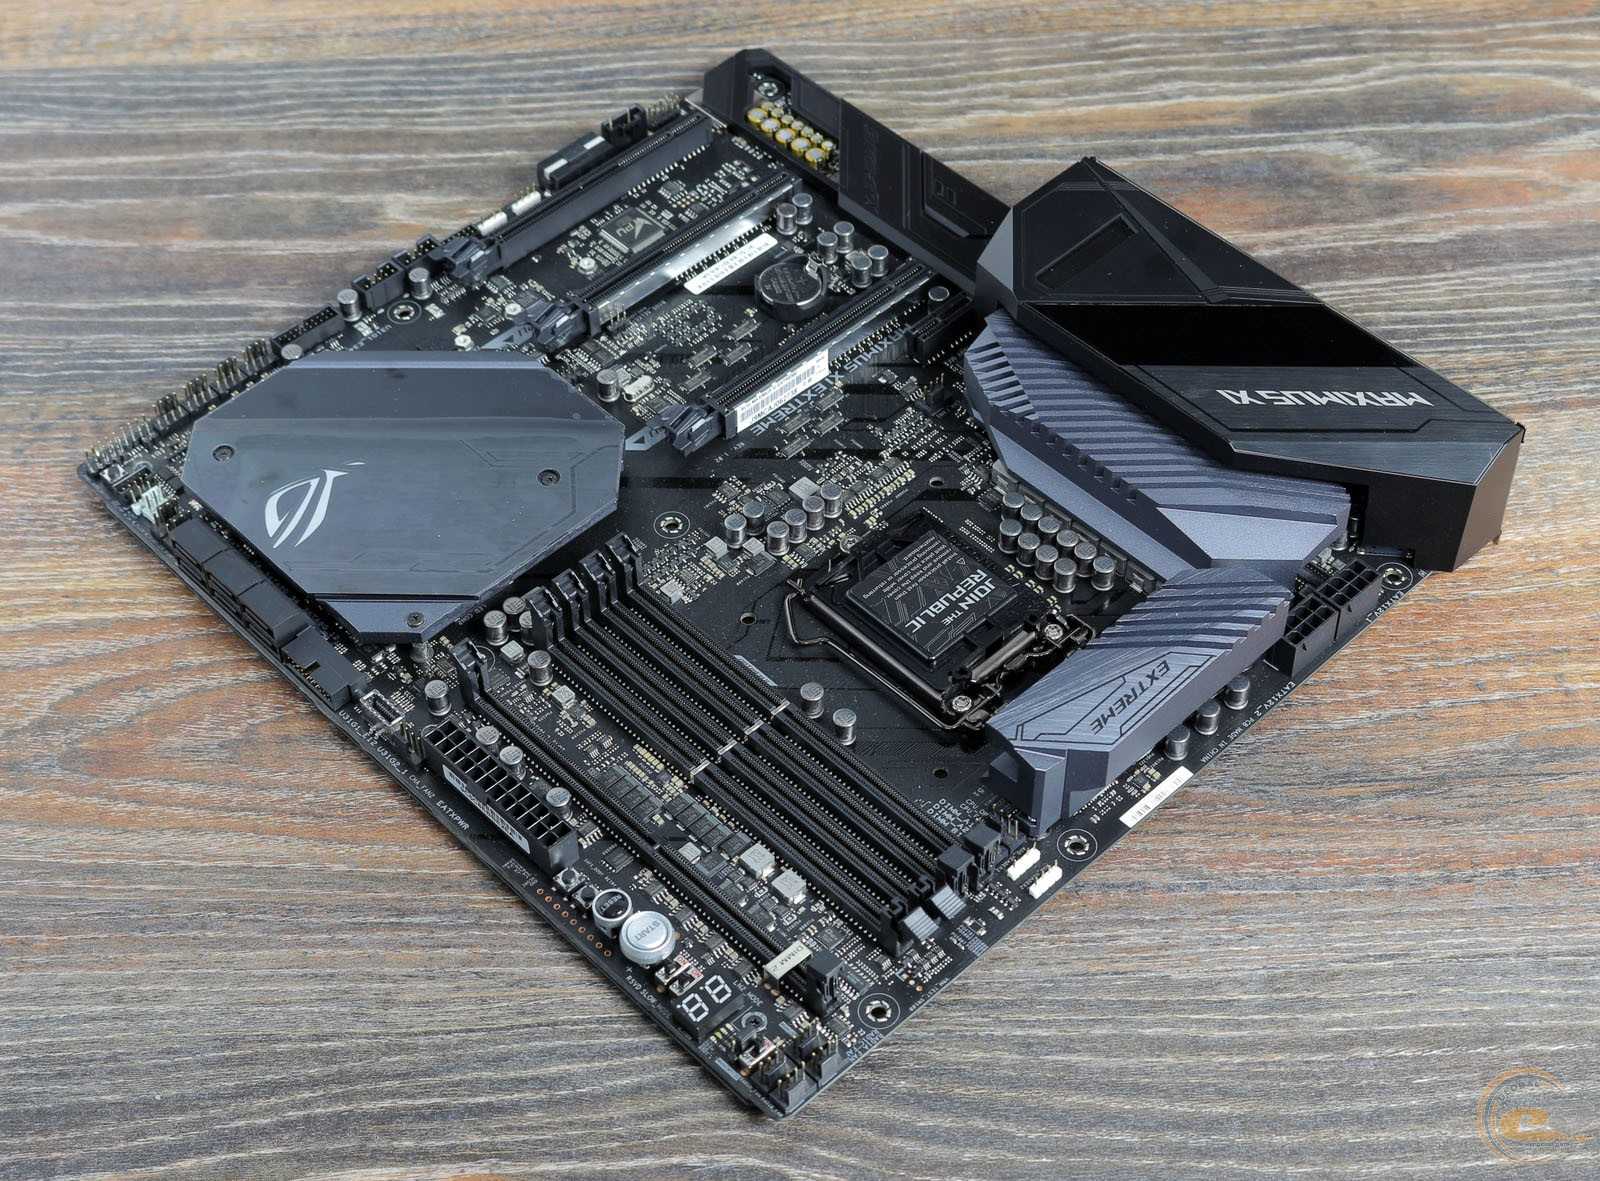 Asus rog maximus xiii extreme/extreme glacial review: z590 flagships on air or water | tom's hardware